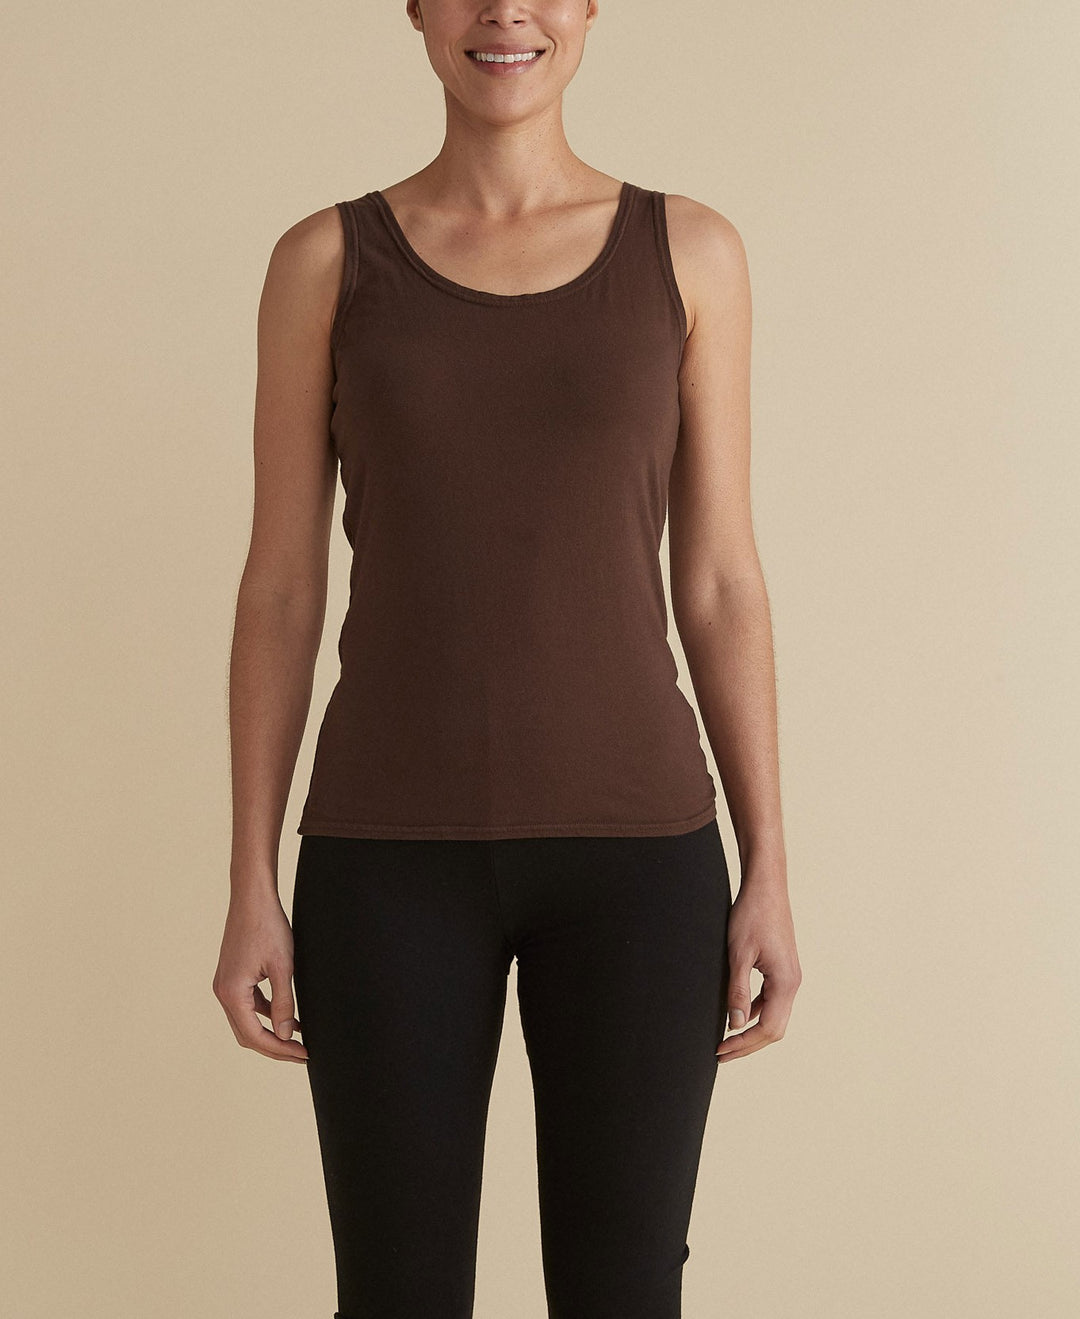 Cut Loose Cotton Stretch - Even Longer Tank 20 Colors (Special Order)